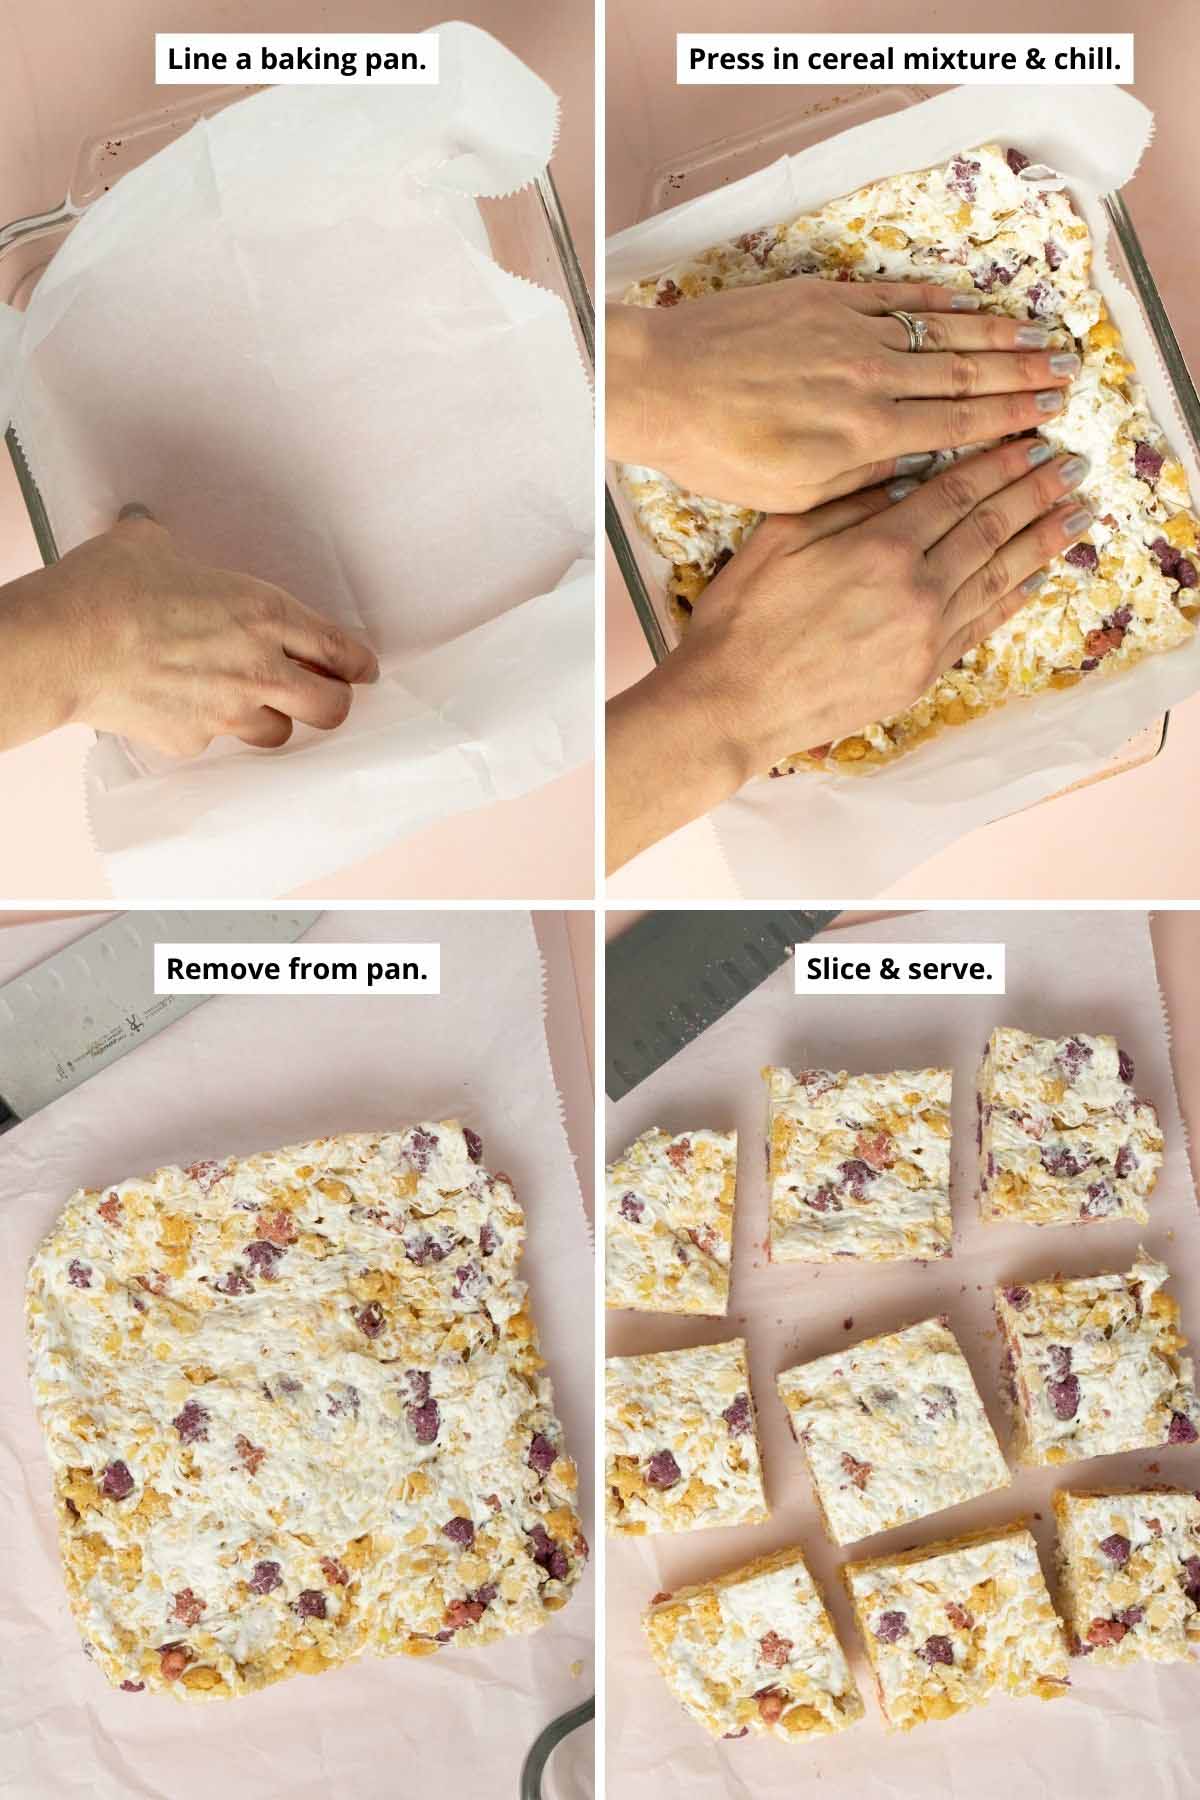 image collage showing pan lined with parchment paper, pressing in the vegan rice crispy treats, and the vegan marshmallow treats after chilling before and after slicing